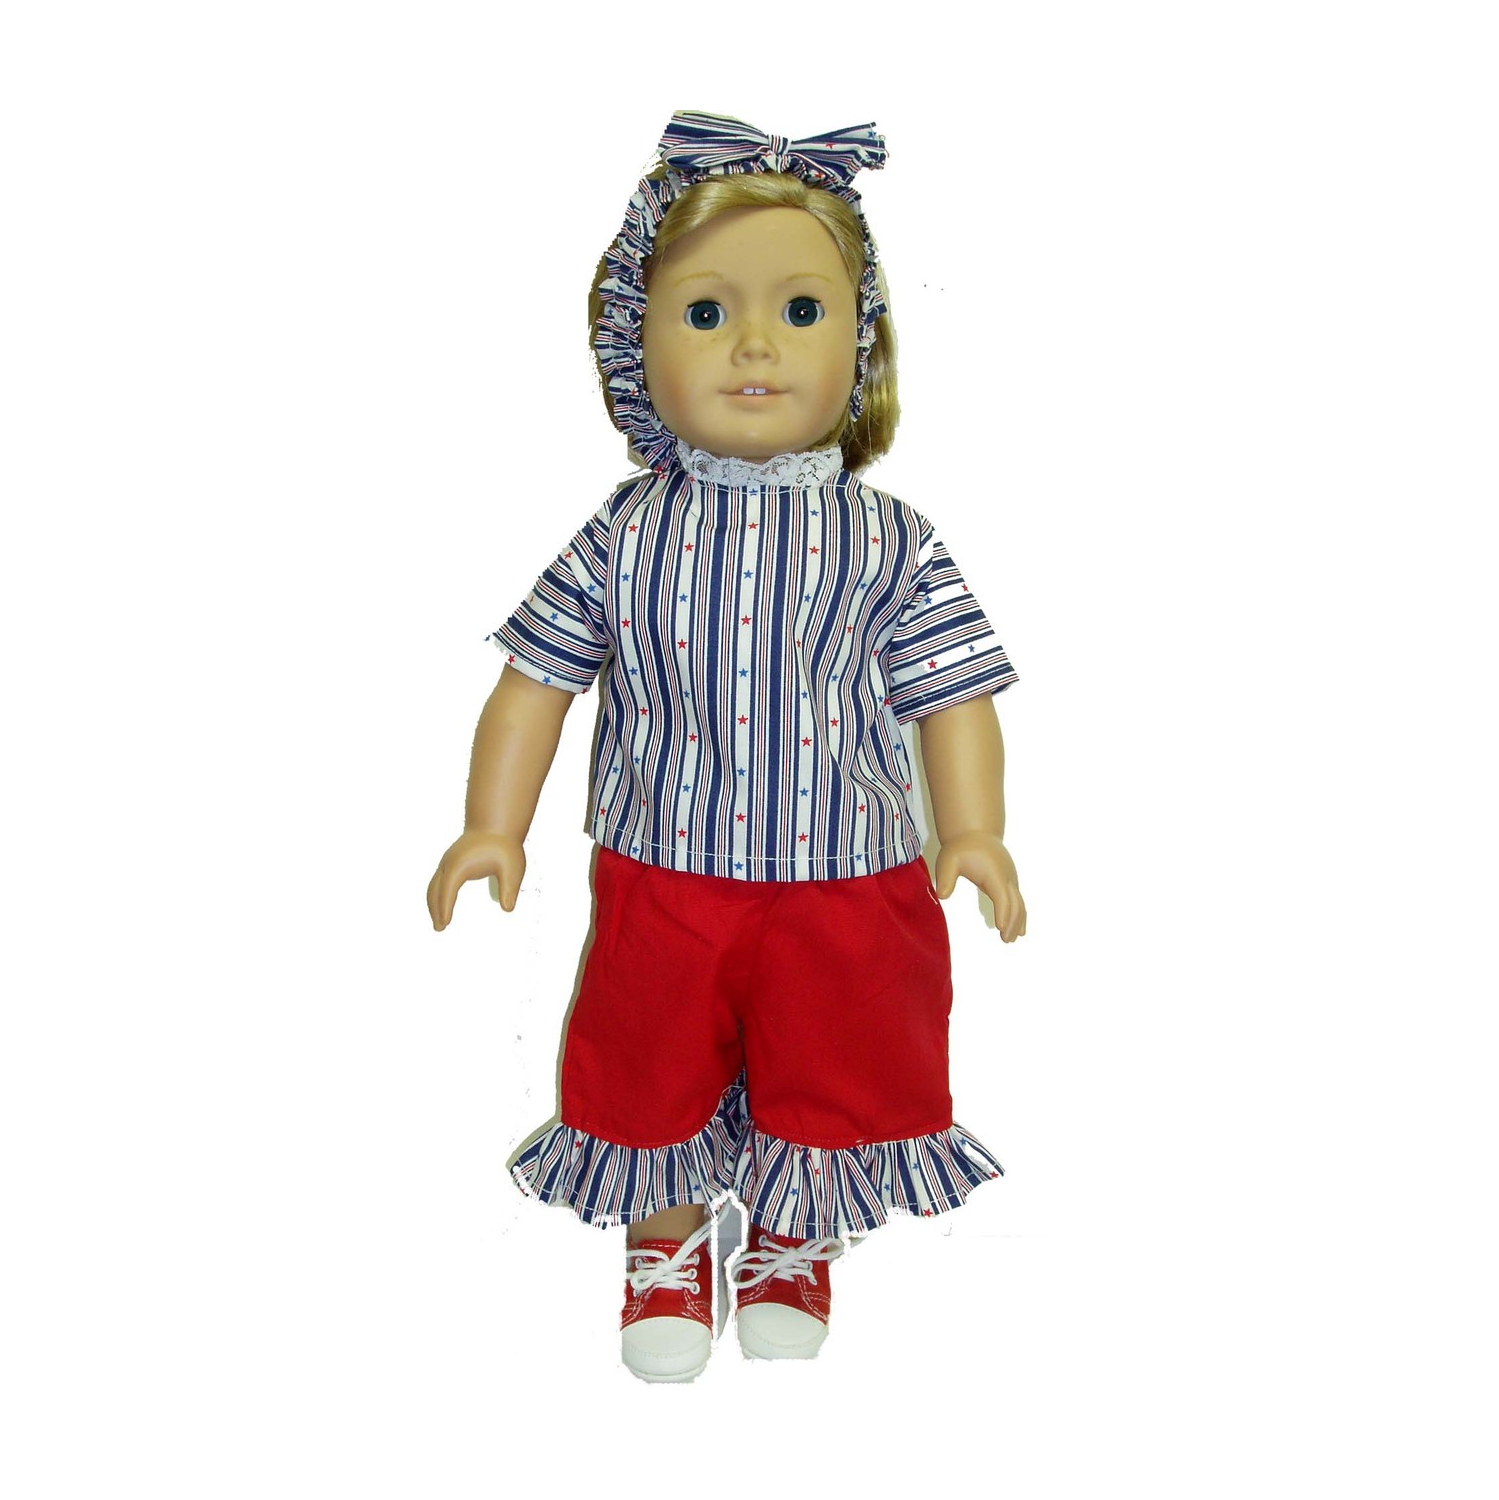 Doll Clothes Superstore Stars n Stripes For 18 Inch Girl Dolls Like American Girl Our Generation My Life Dolls